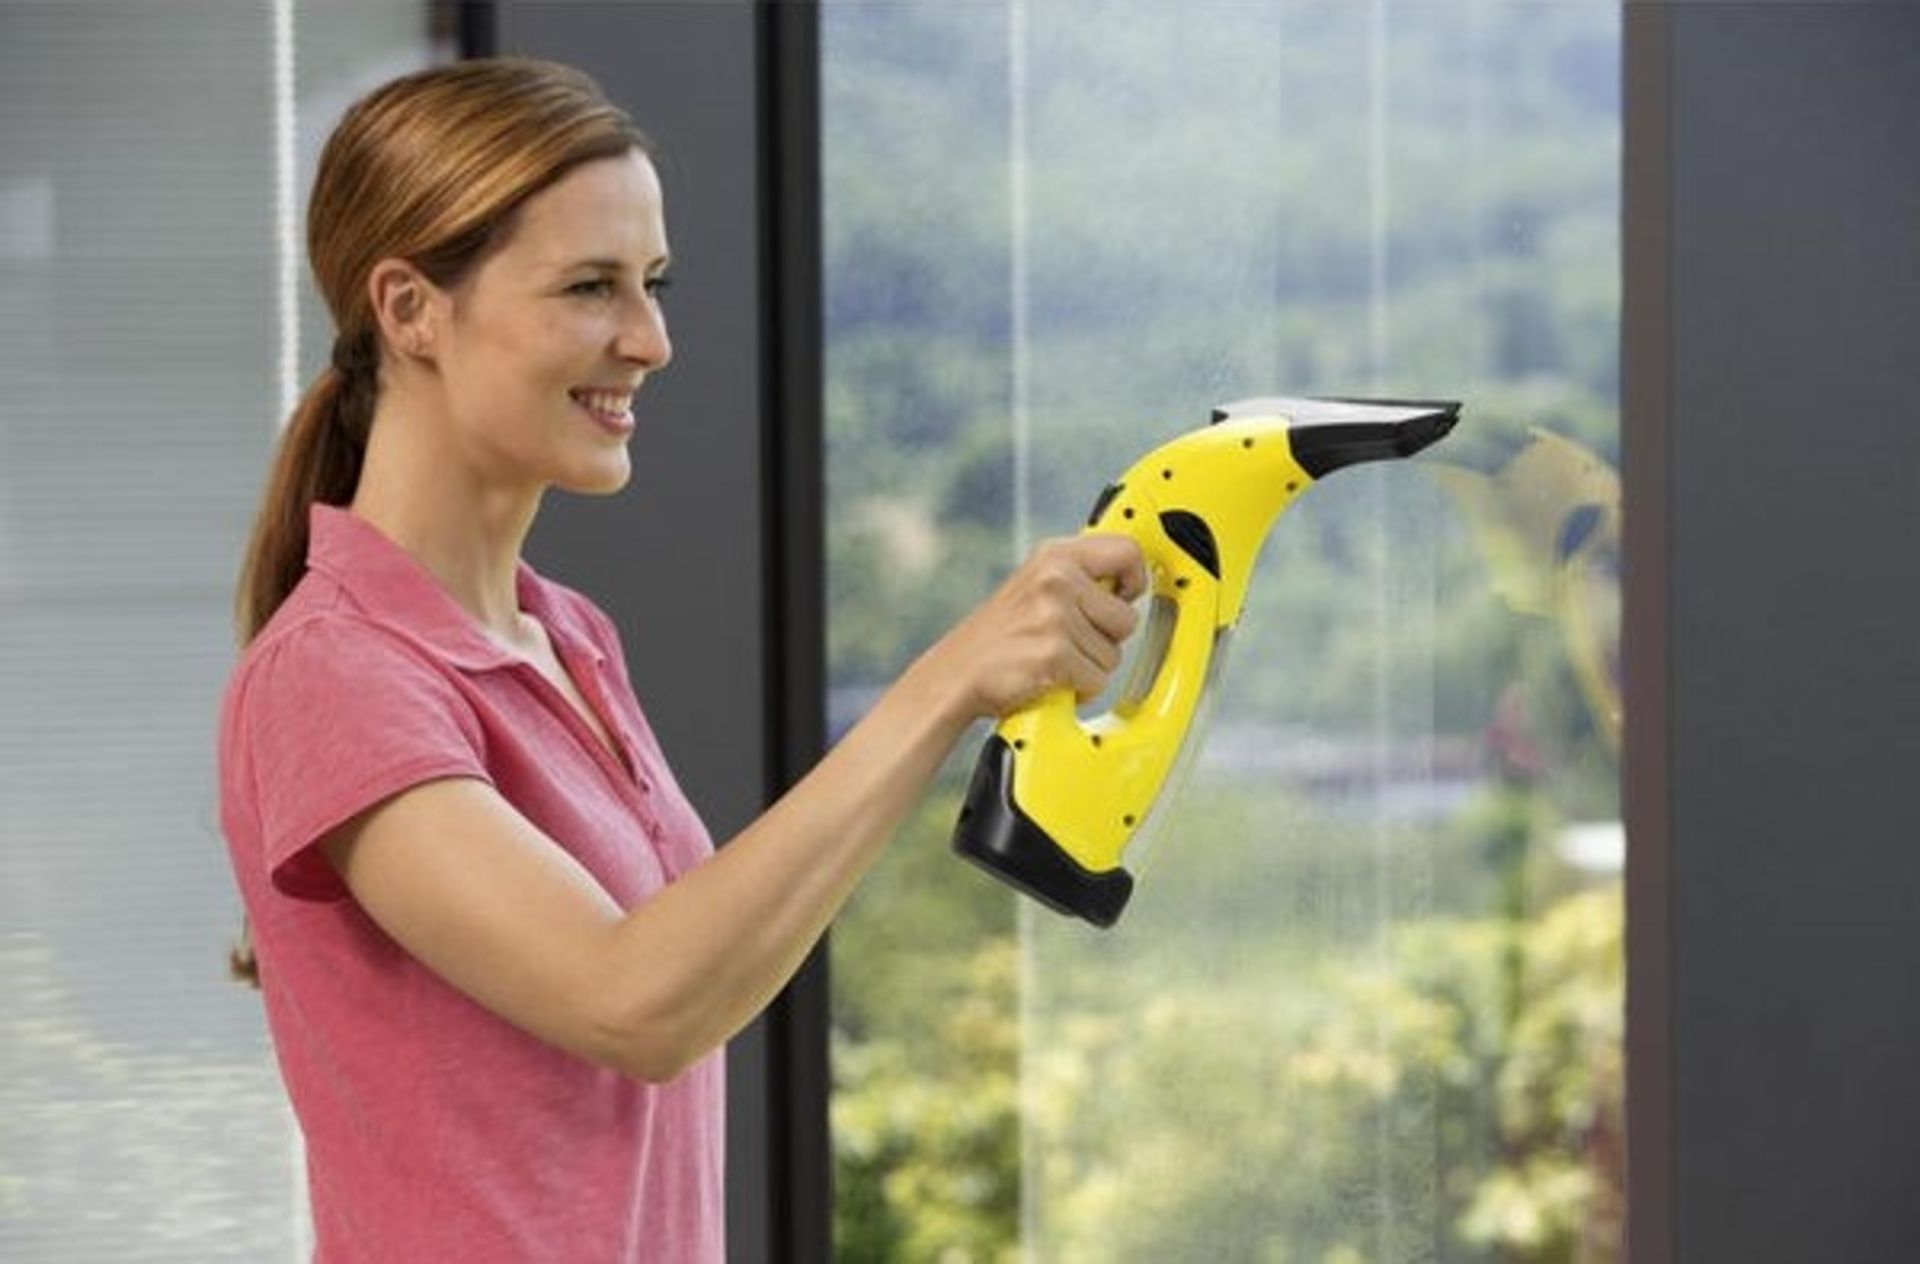 V Brand New Karcher WV2 Window Vacuum Cleaner - £54.98 at GardenLines.co.uk - Cleans Up To 60